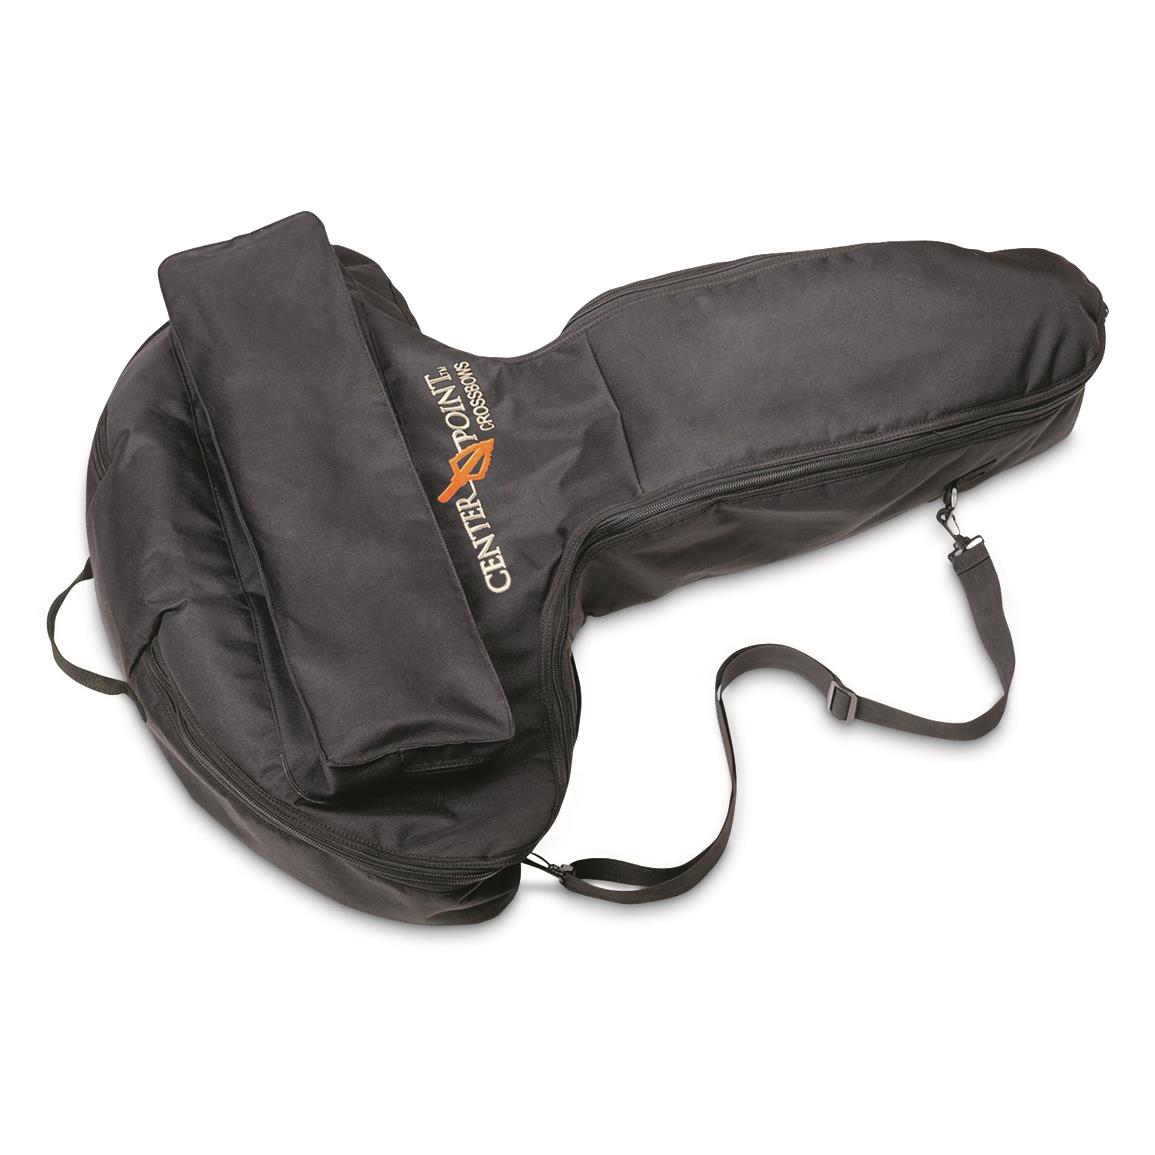 CenterPoint Soft Sided Crossbow Case